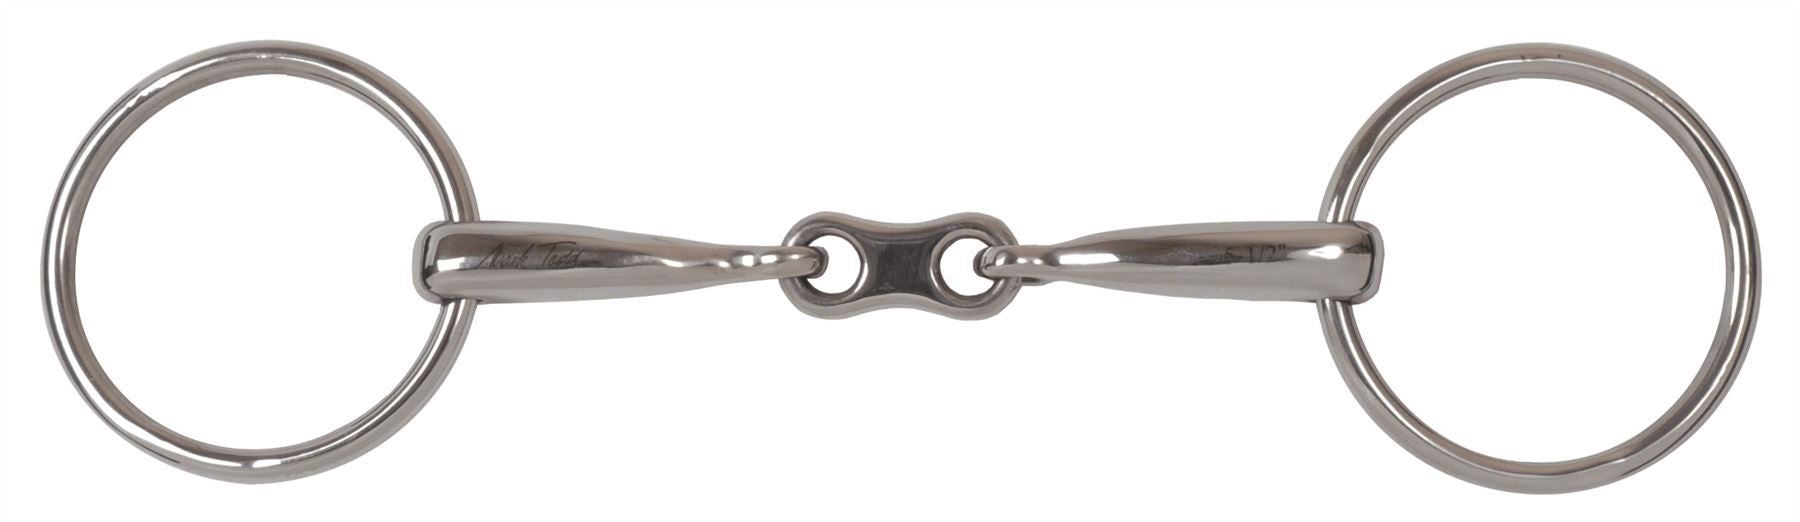 JHLPS Loose Ring Jointed Snaffle - Just Horse Riders